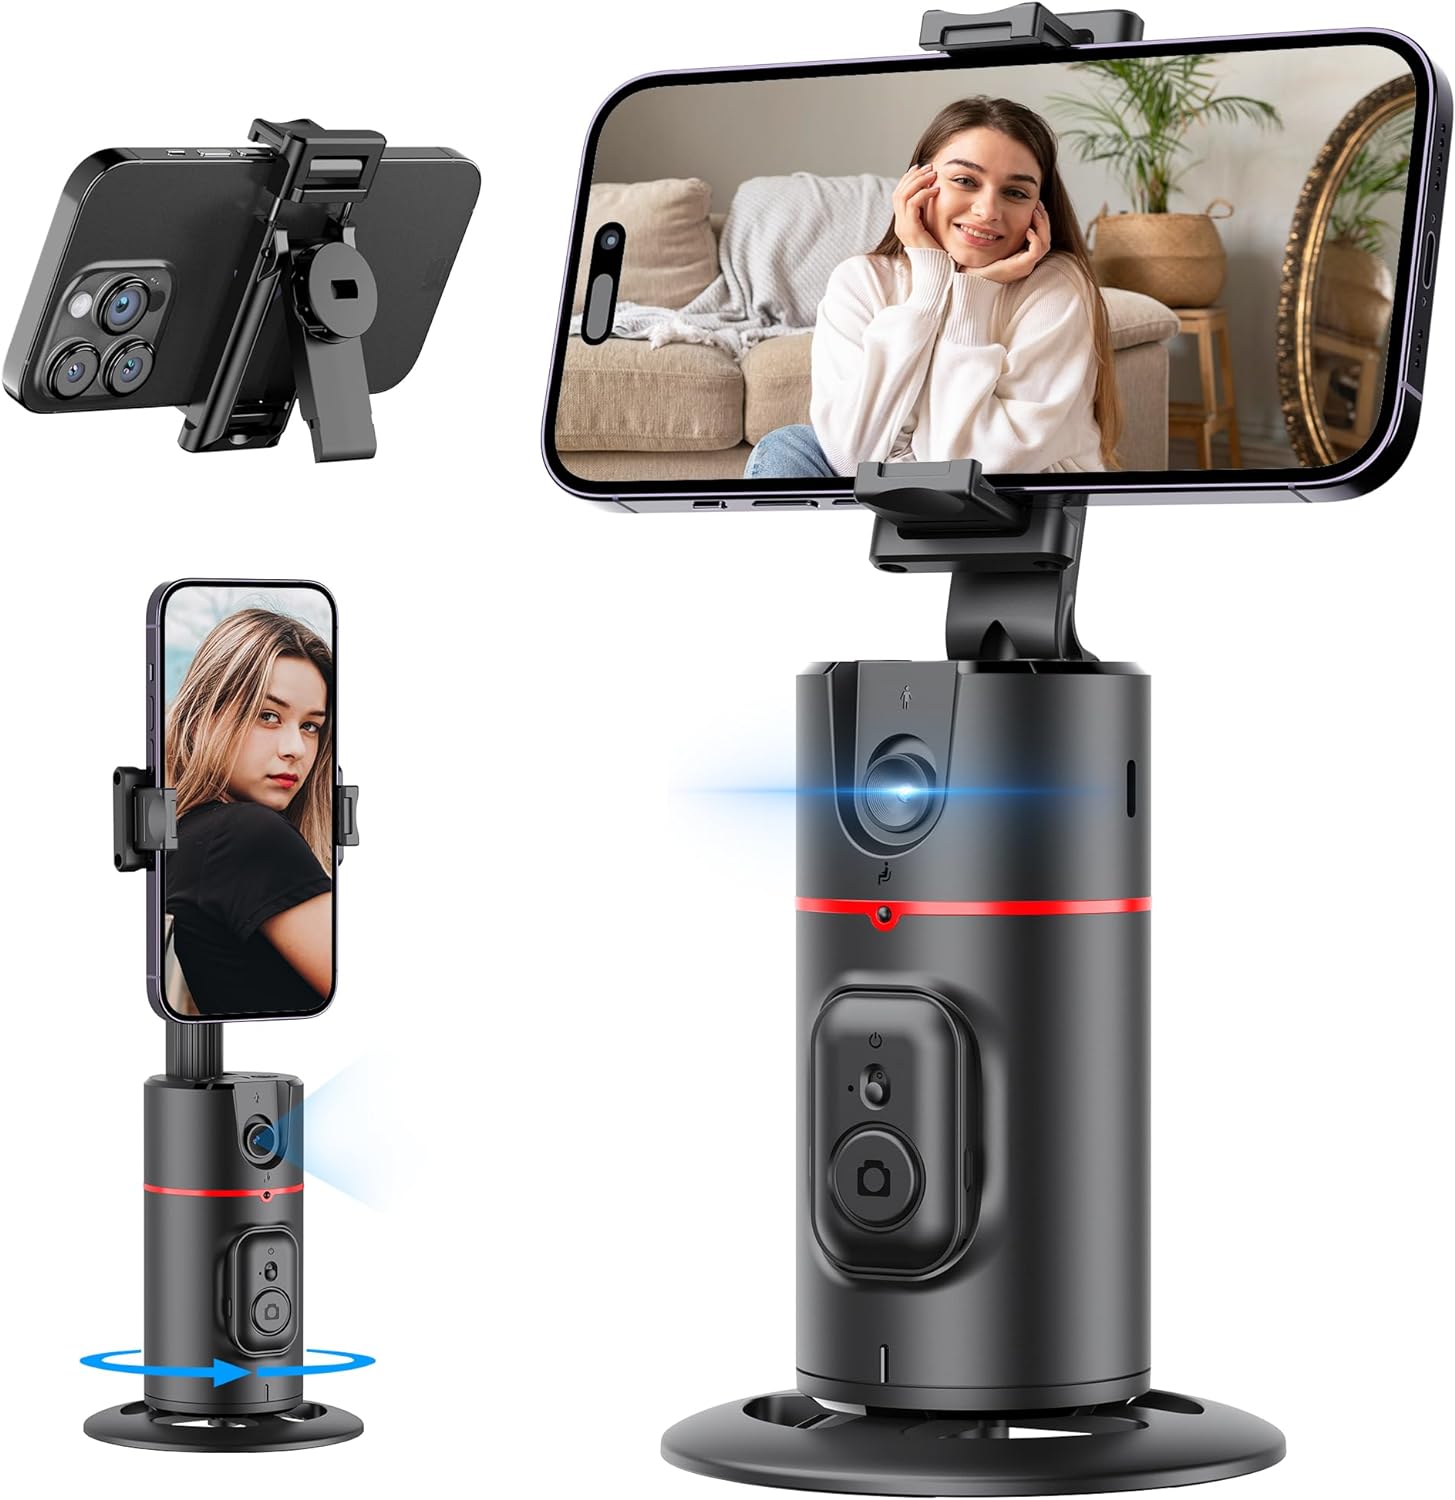 Auto Face Tracking Tripod, No App, Smart Shooting Phone Holder with Remote, 360 Rotation Body Phone Camera Mount Extendable Body Smart Tracking Tripod for Vlog/TIK Tok, Rechargeable Battery (Black)